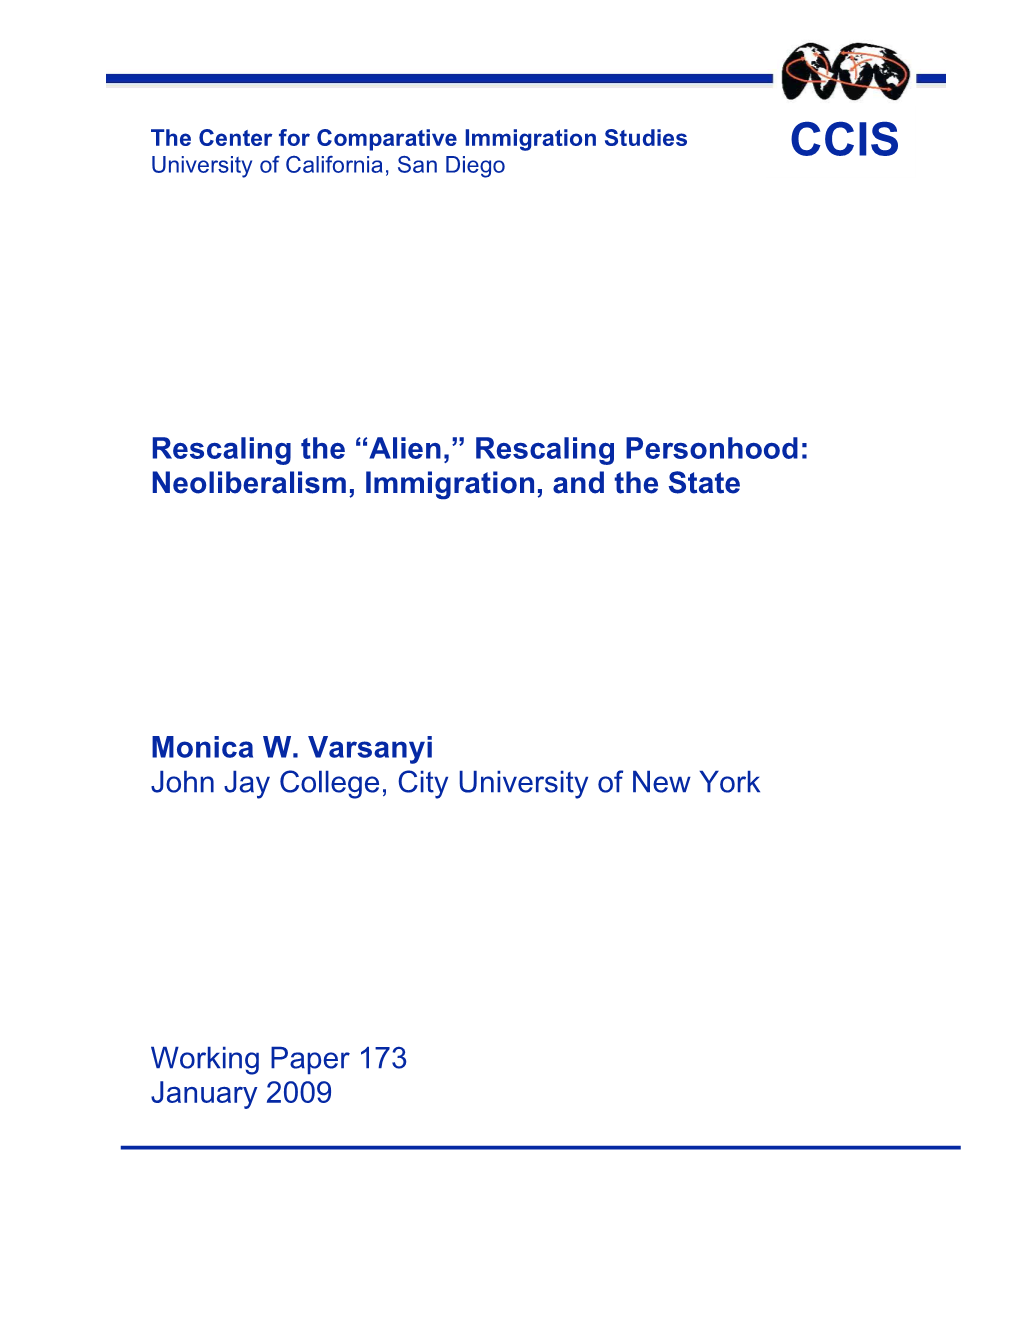 Rescaling Personhood: Neoliberalism, Immigration, and the State